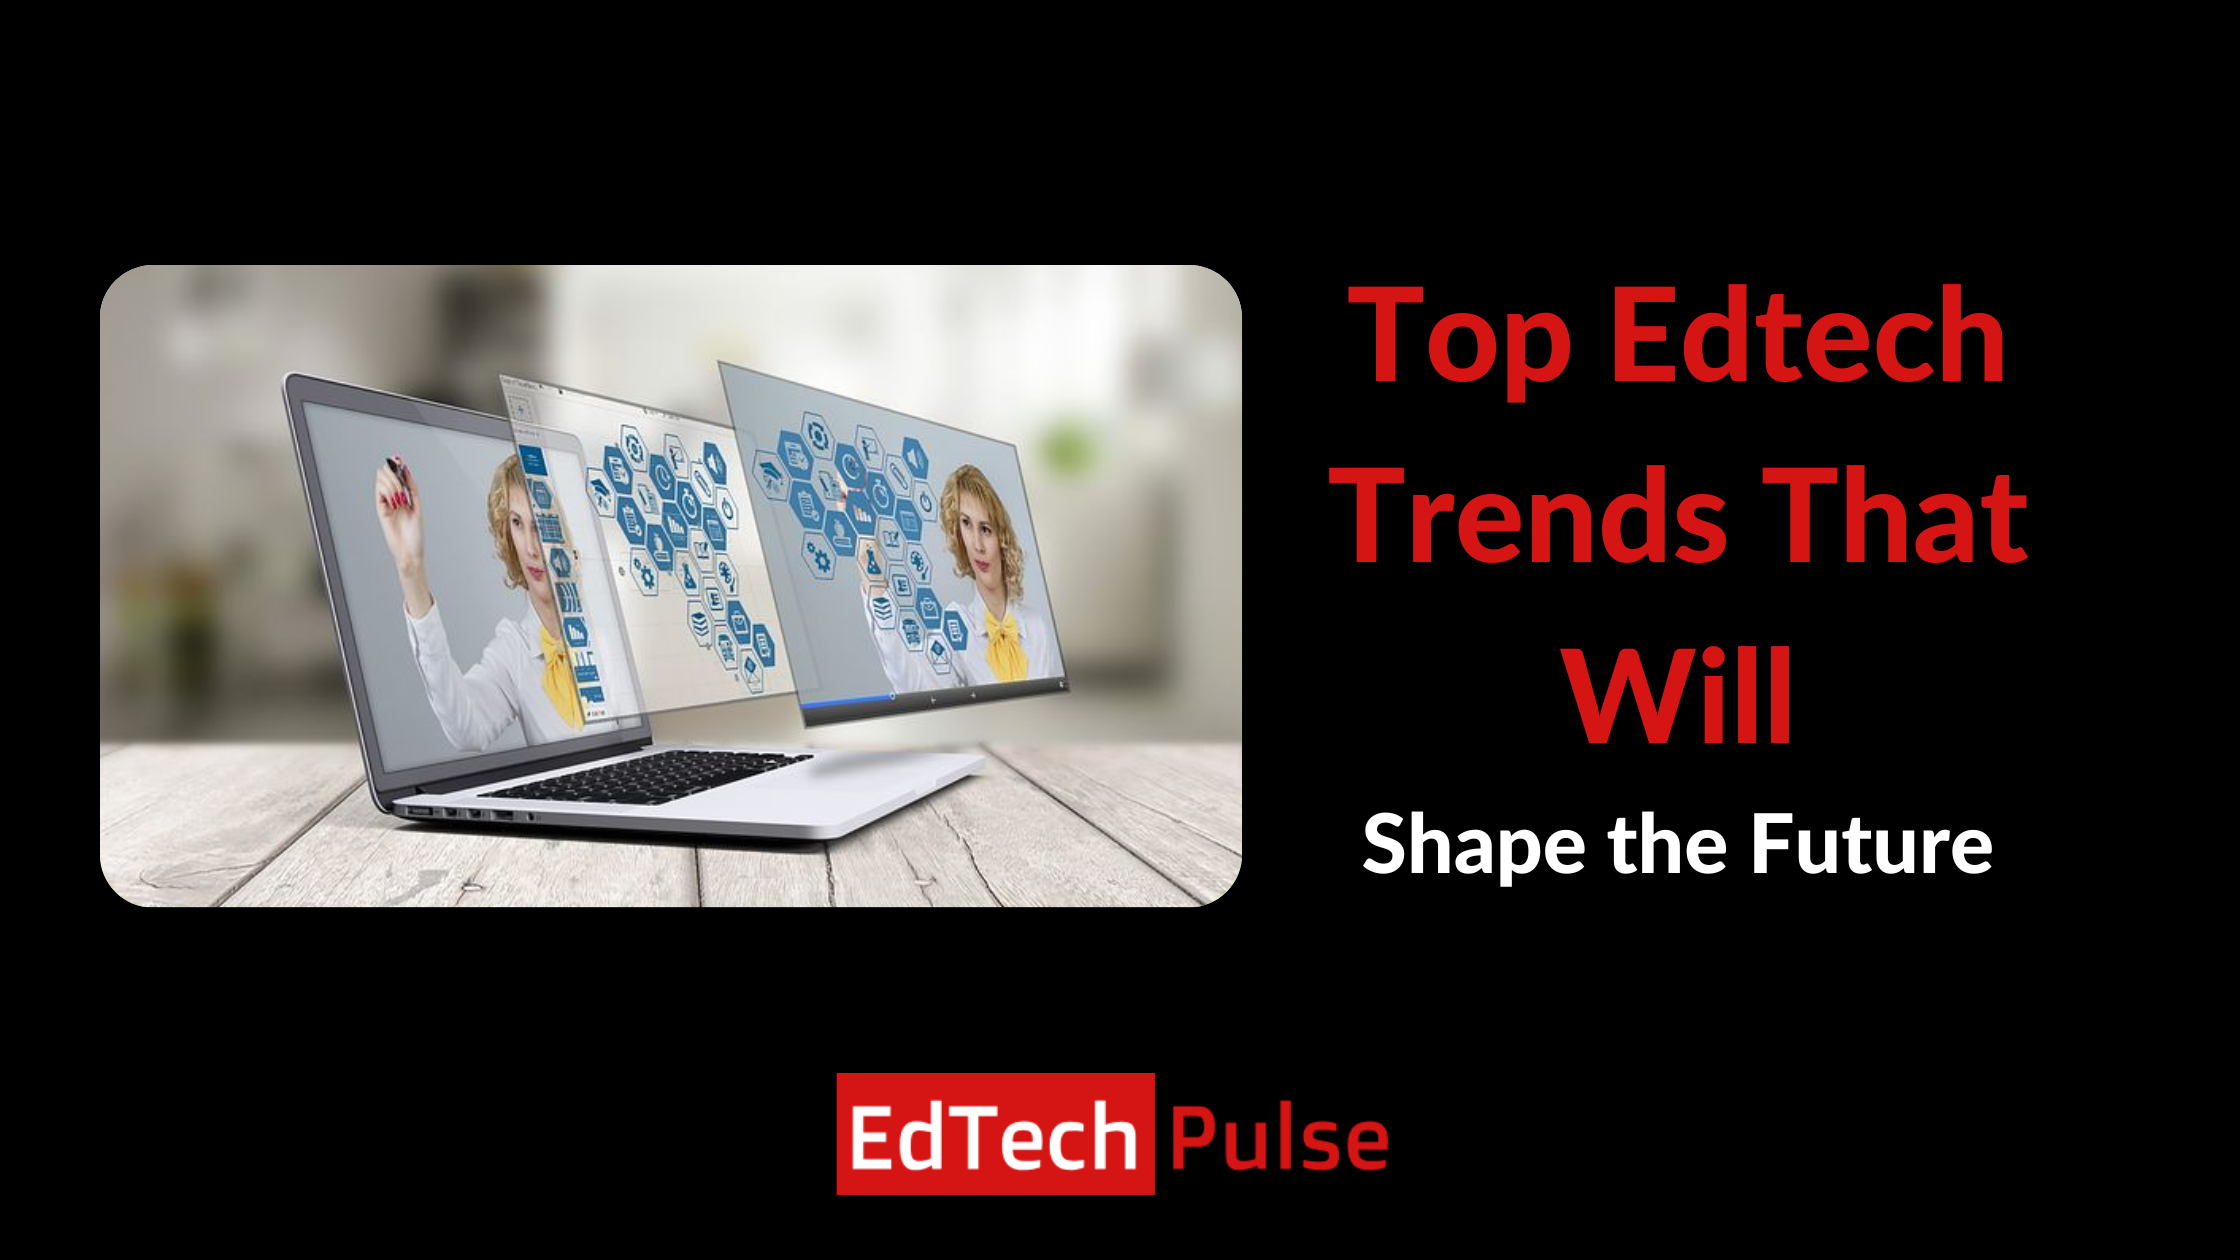 Top Edtech Trends That Will Shape the Future